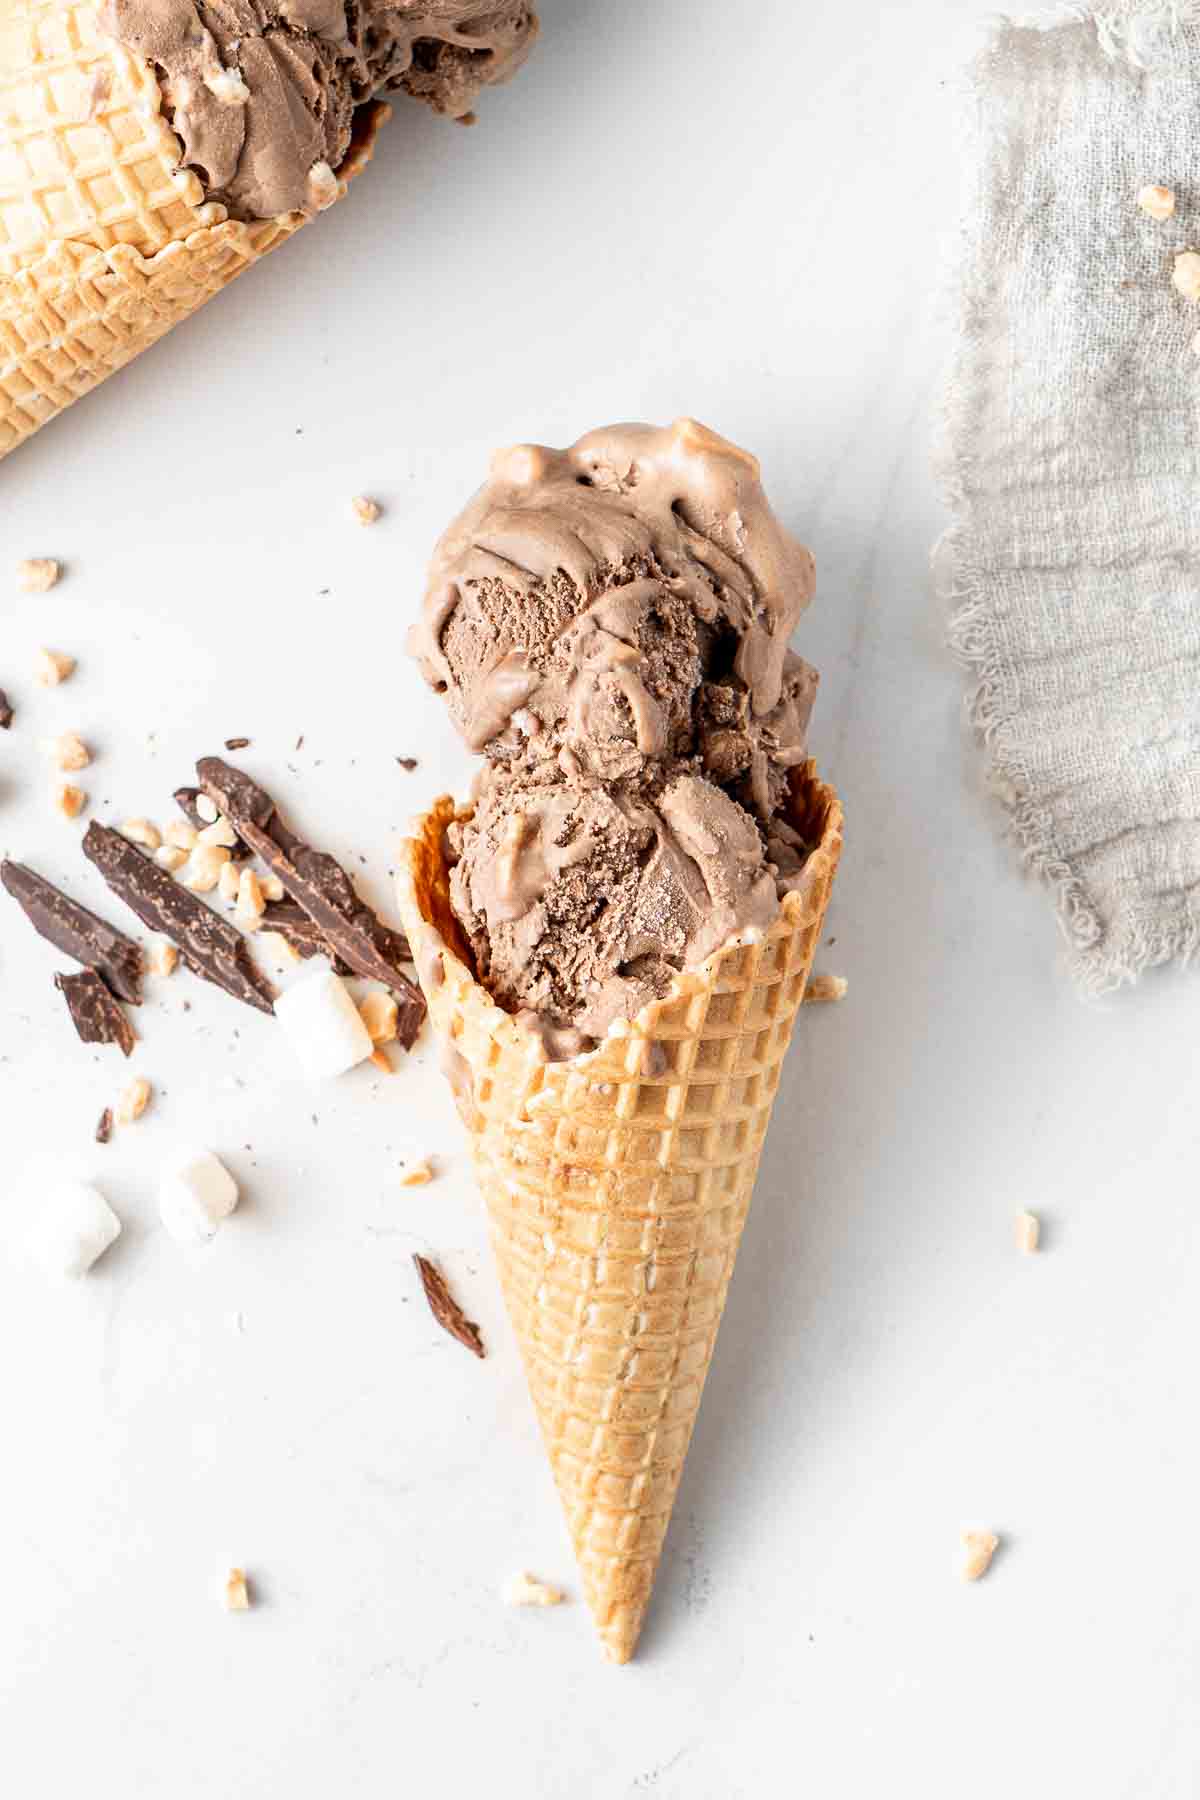 Two scoops of dairy free chocolate ice cream in a waffle cone.